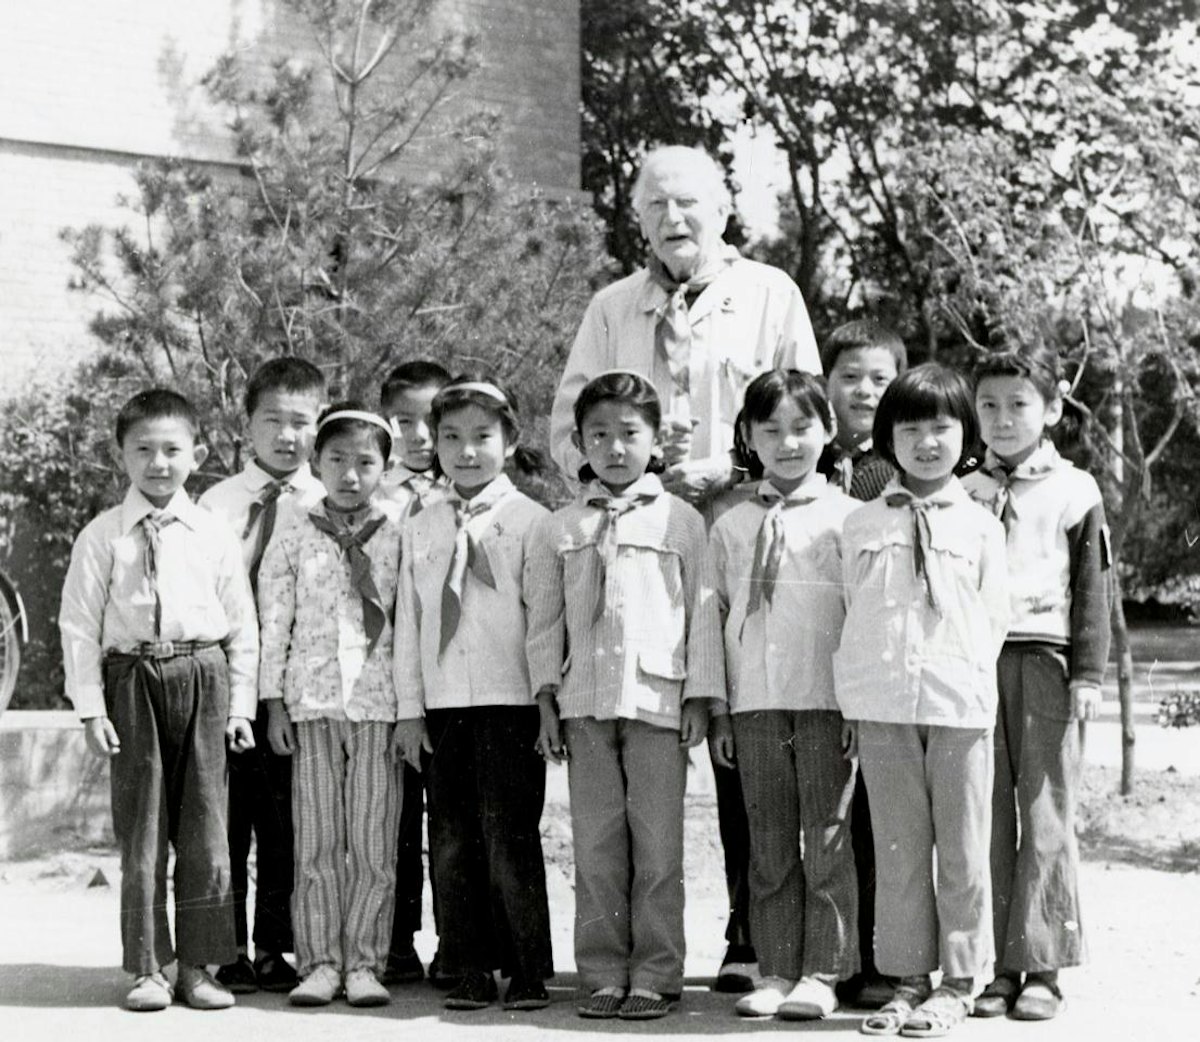 At age 91, St. Barbe met with a group of schoolchildren in China. (Credit: University of Saskatchewan Library, University Archives & Special Collections, Richard St. Barbe Baker Fonds)